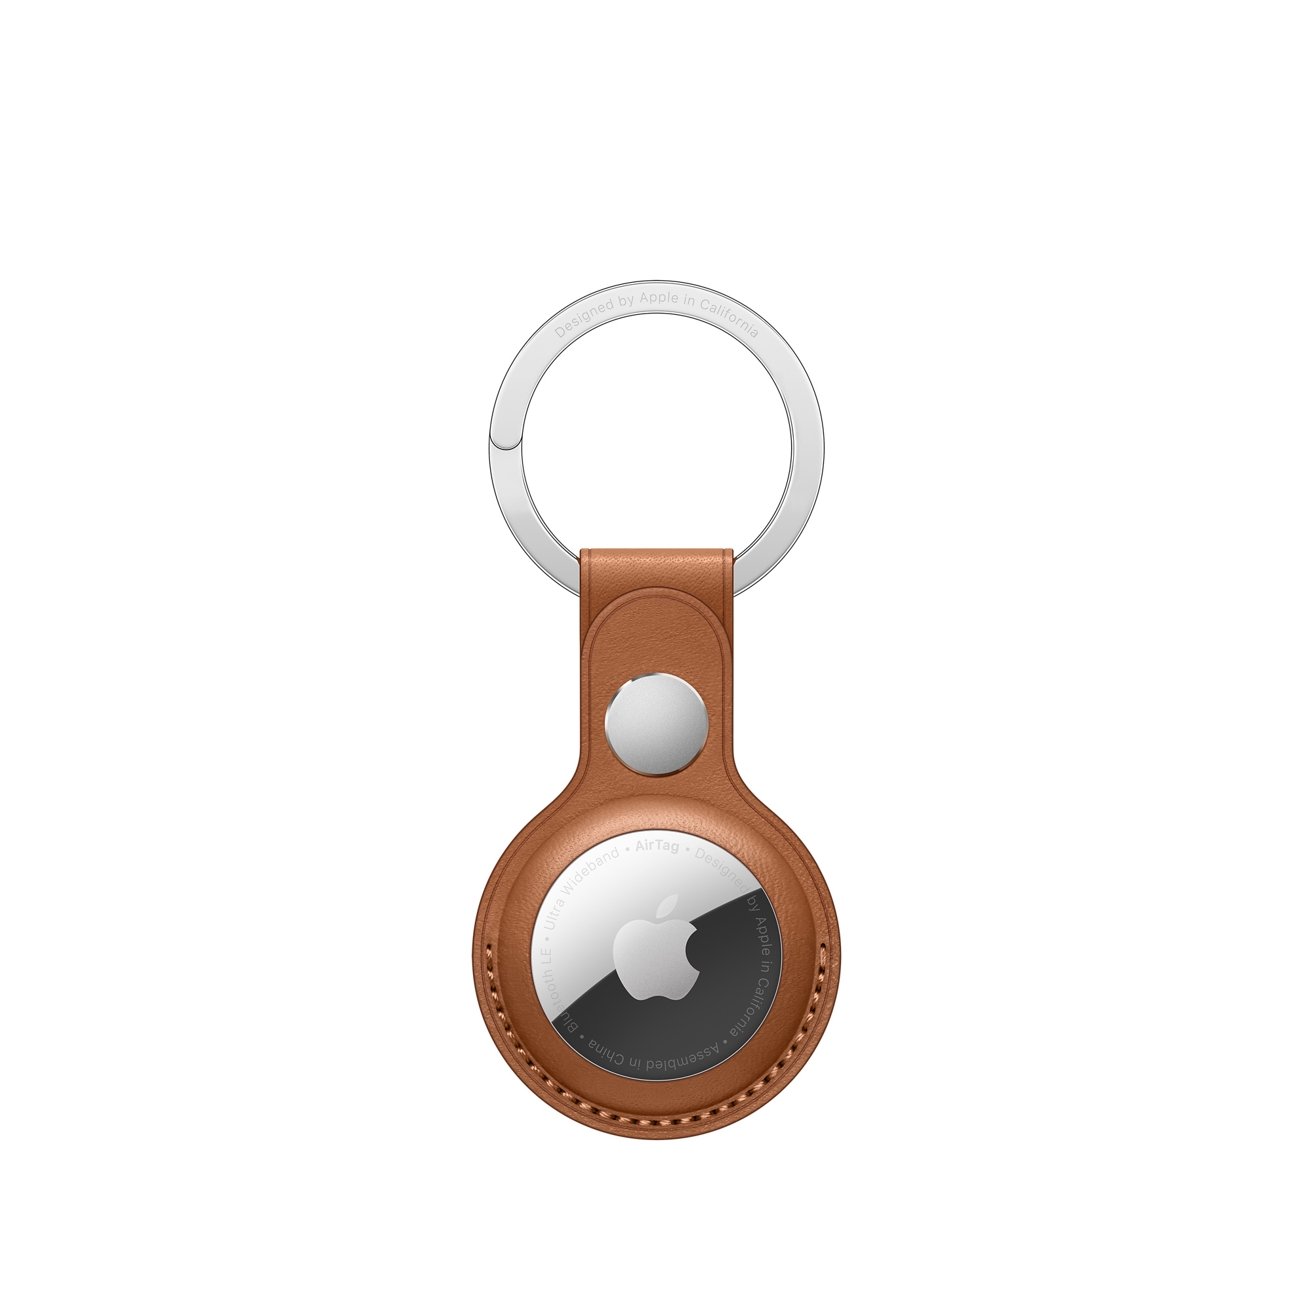 Apple's Leather Keychain